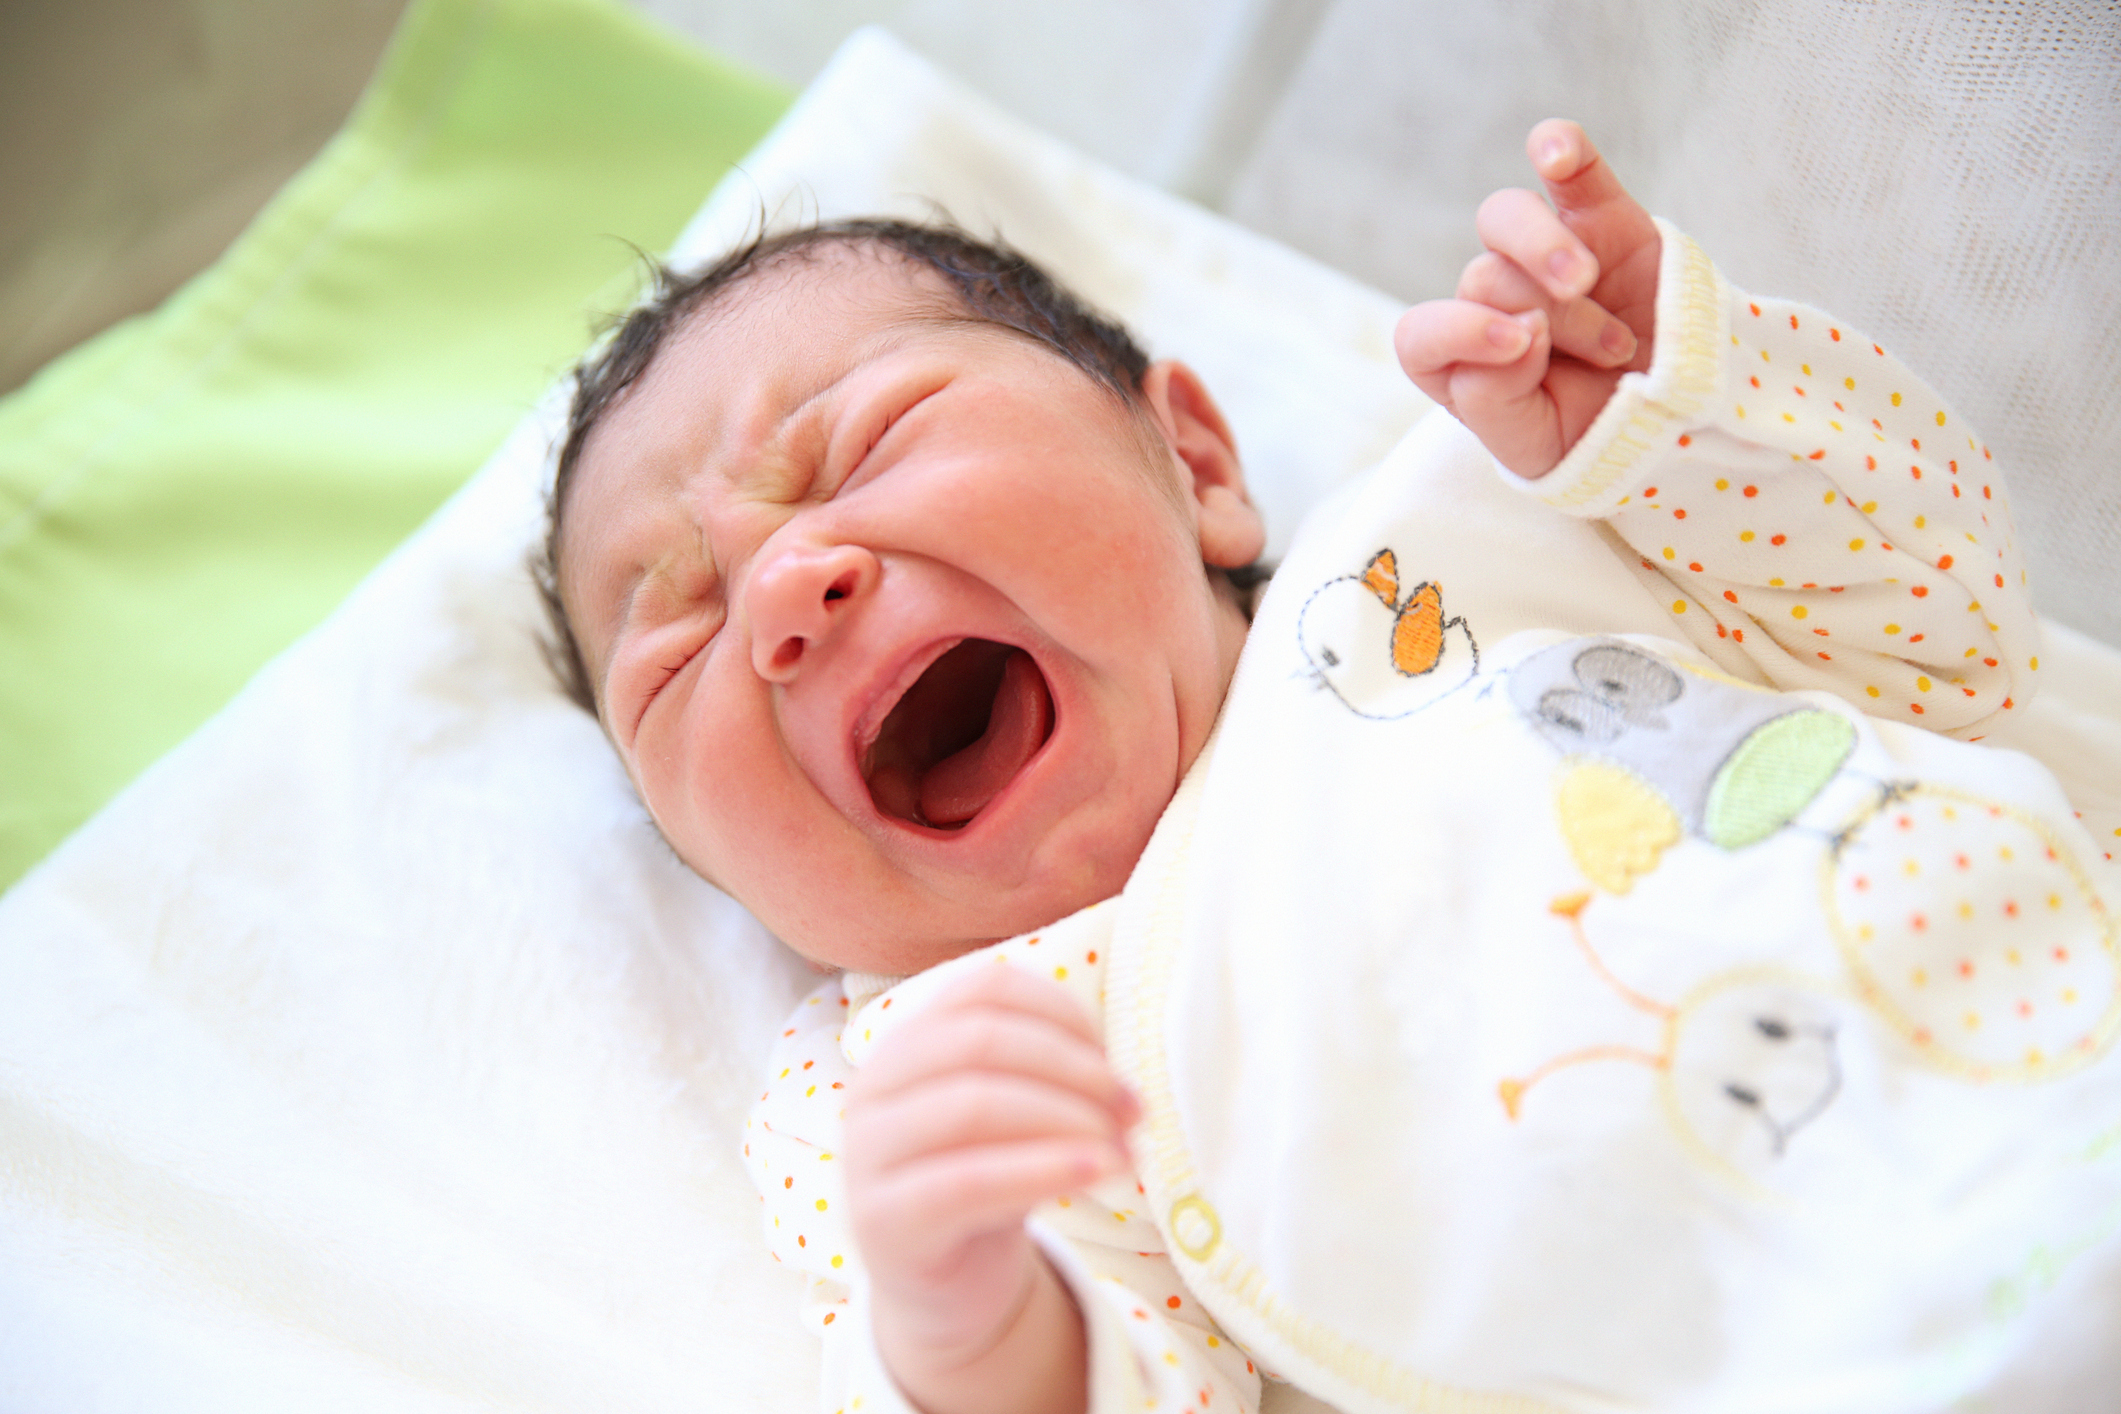 Ask the Expert: Why does my baby cry constantly after feeding?